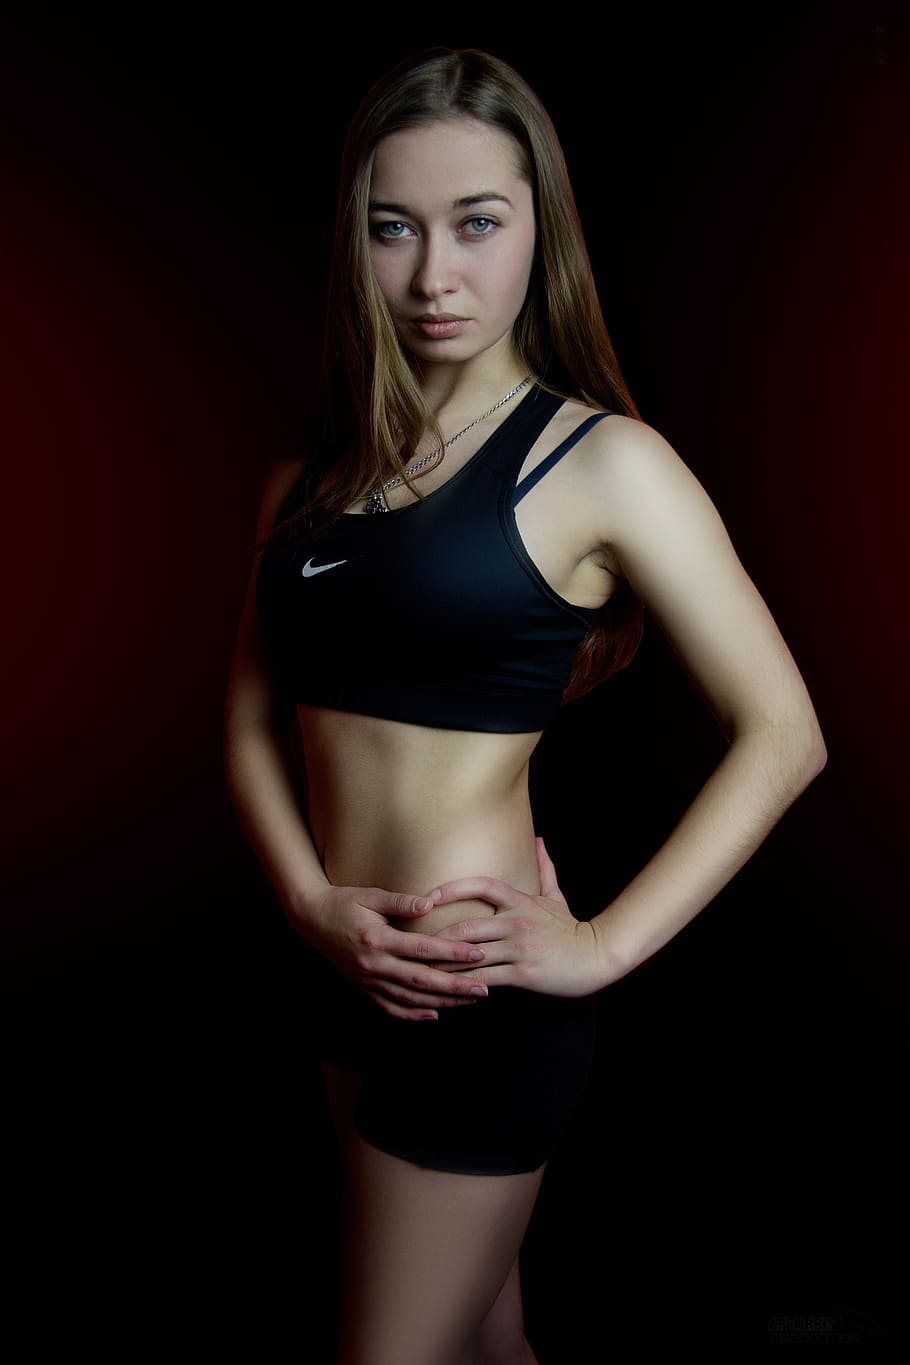 gym, fit, fitness, girl, woman, lady, human, activity, pose, portrait